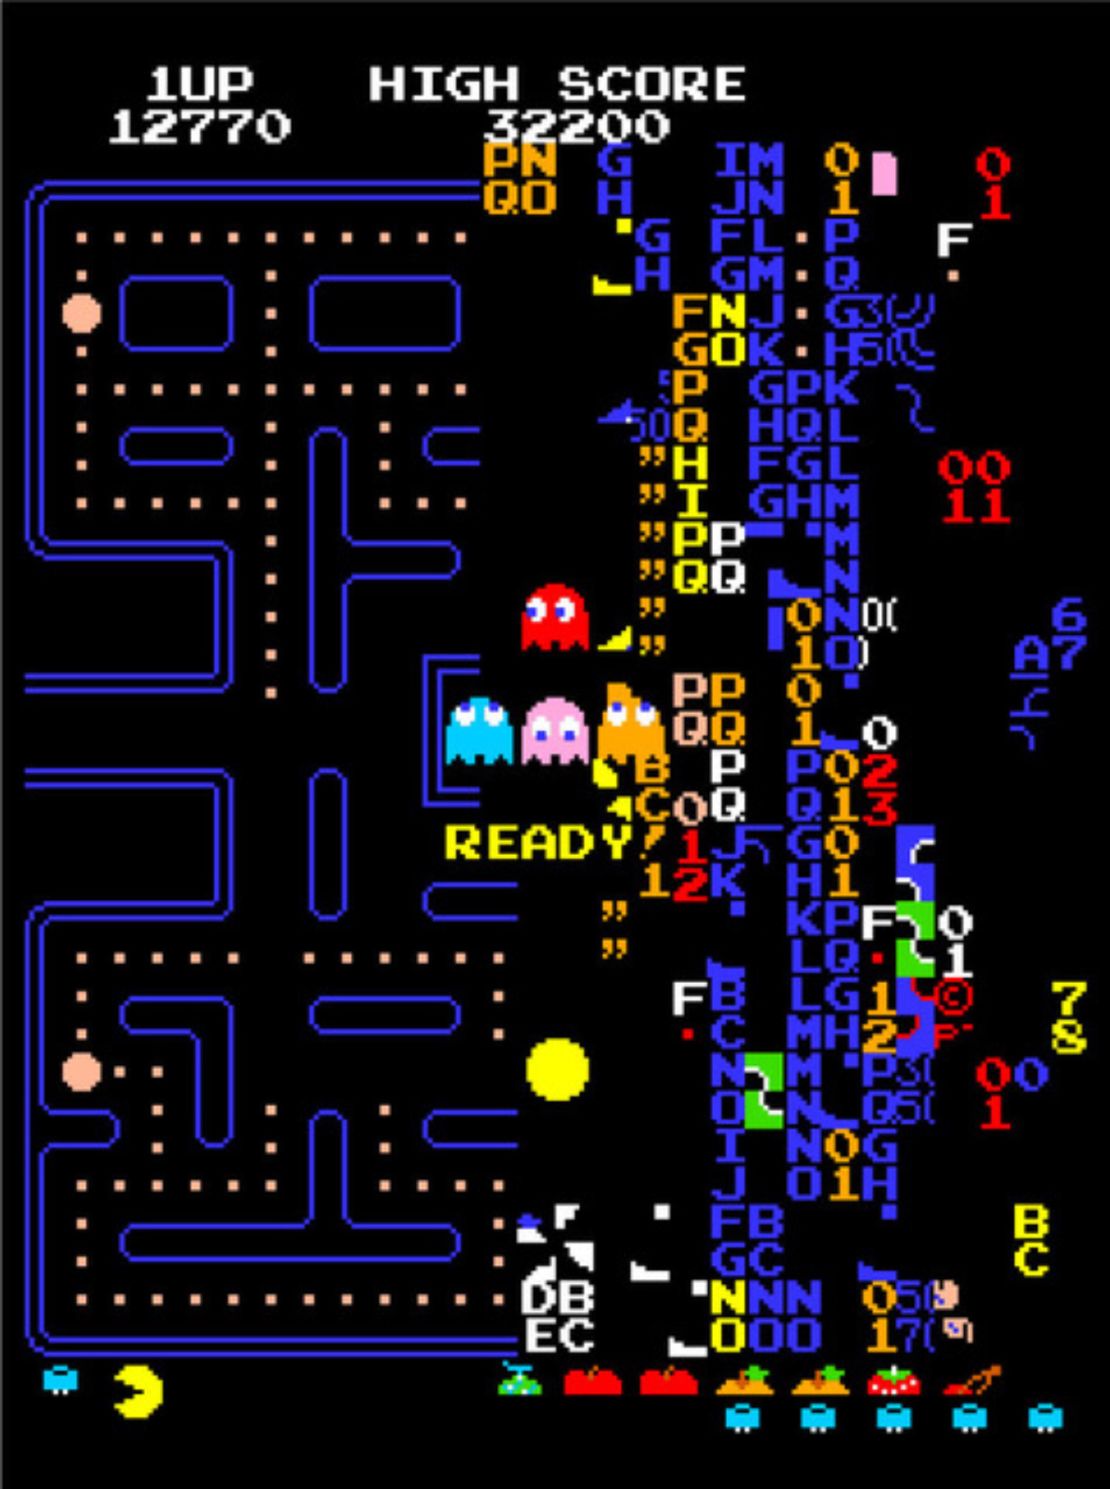 Pacman - Play Game Instantly!